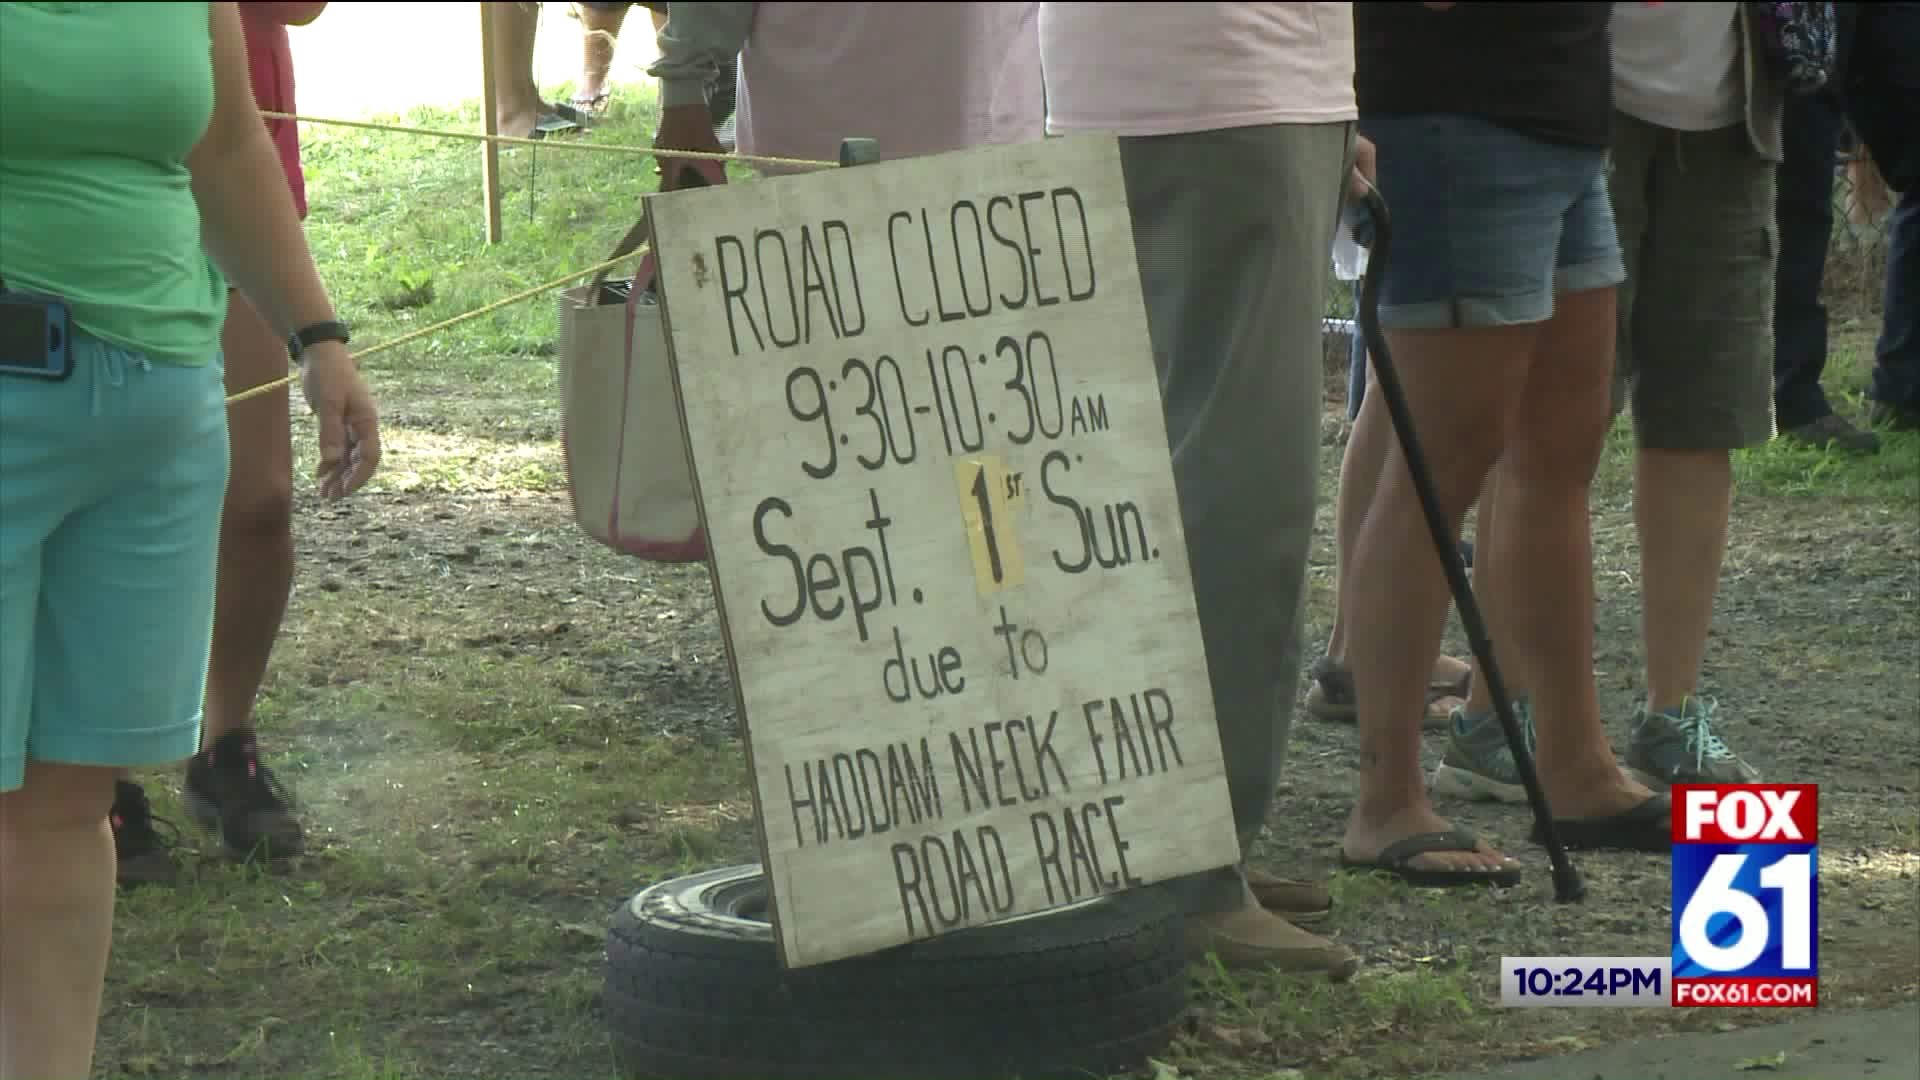 Haddam Neck Fair draws large crowd for Labor Day weekend